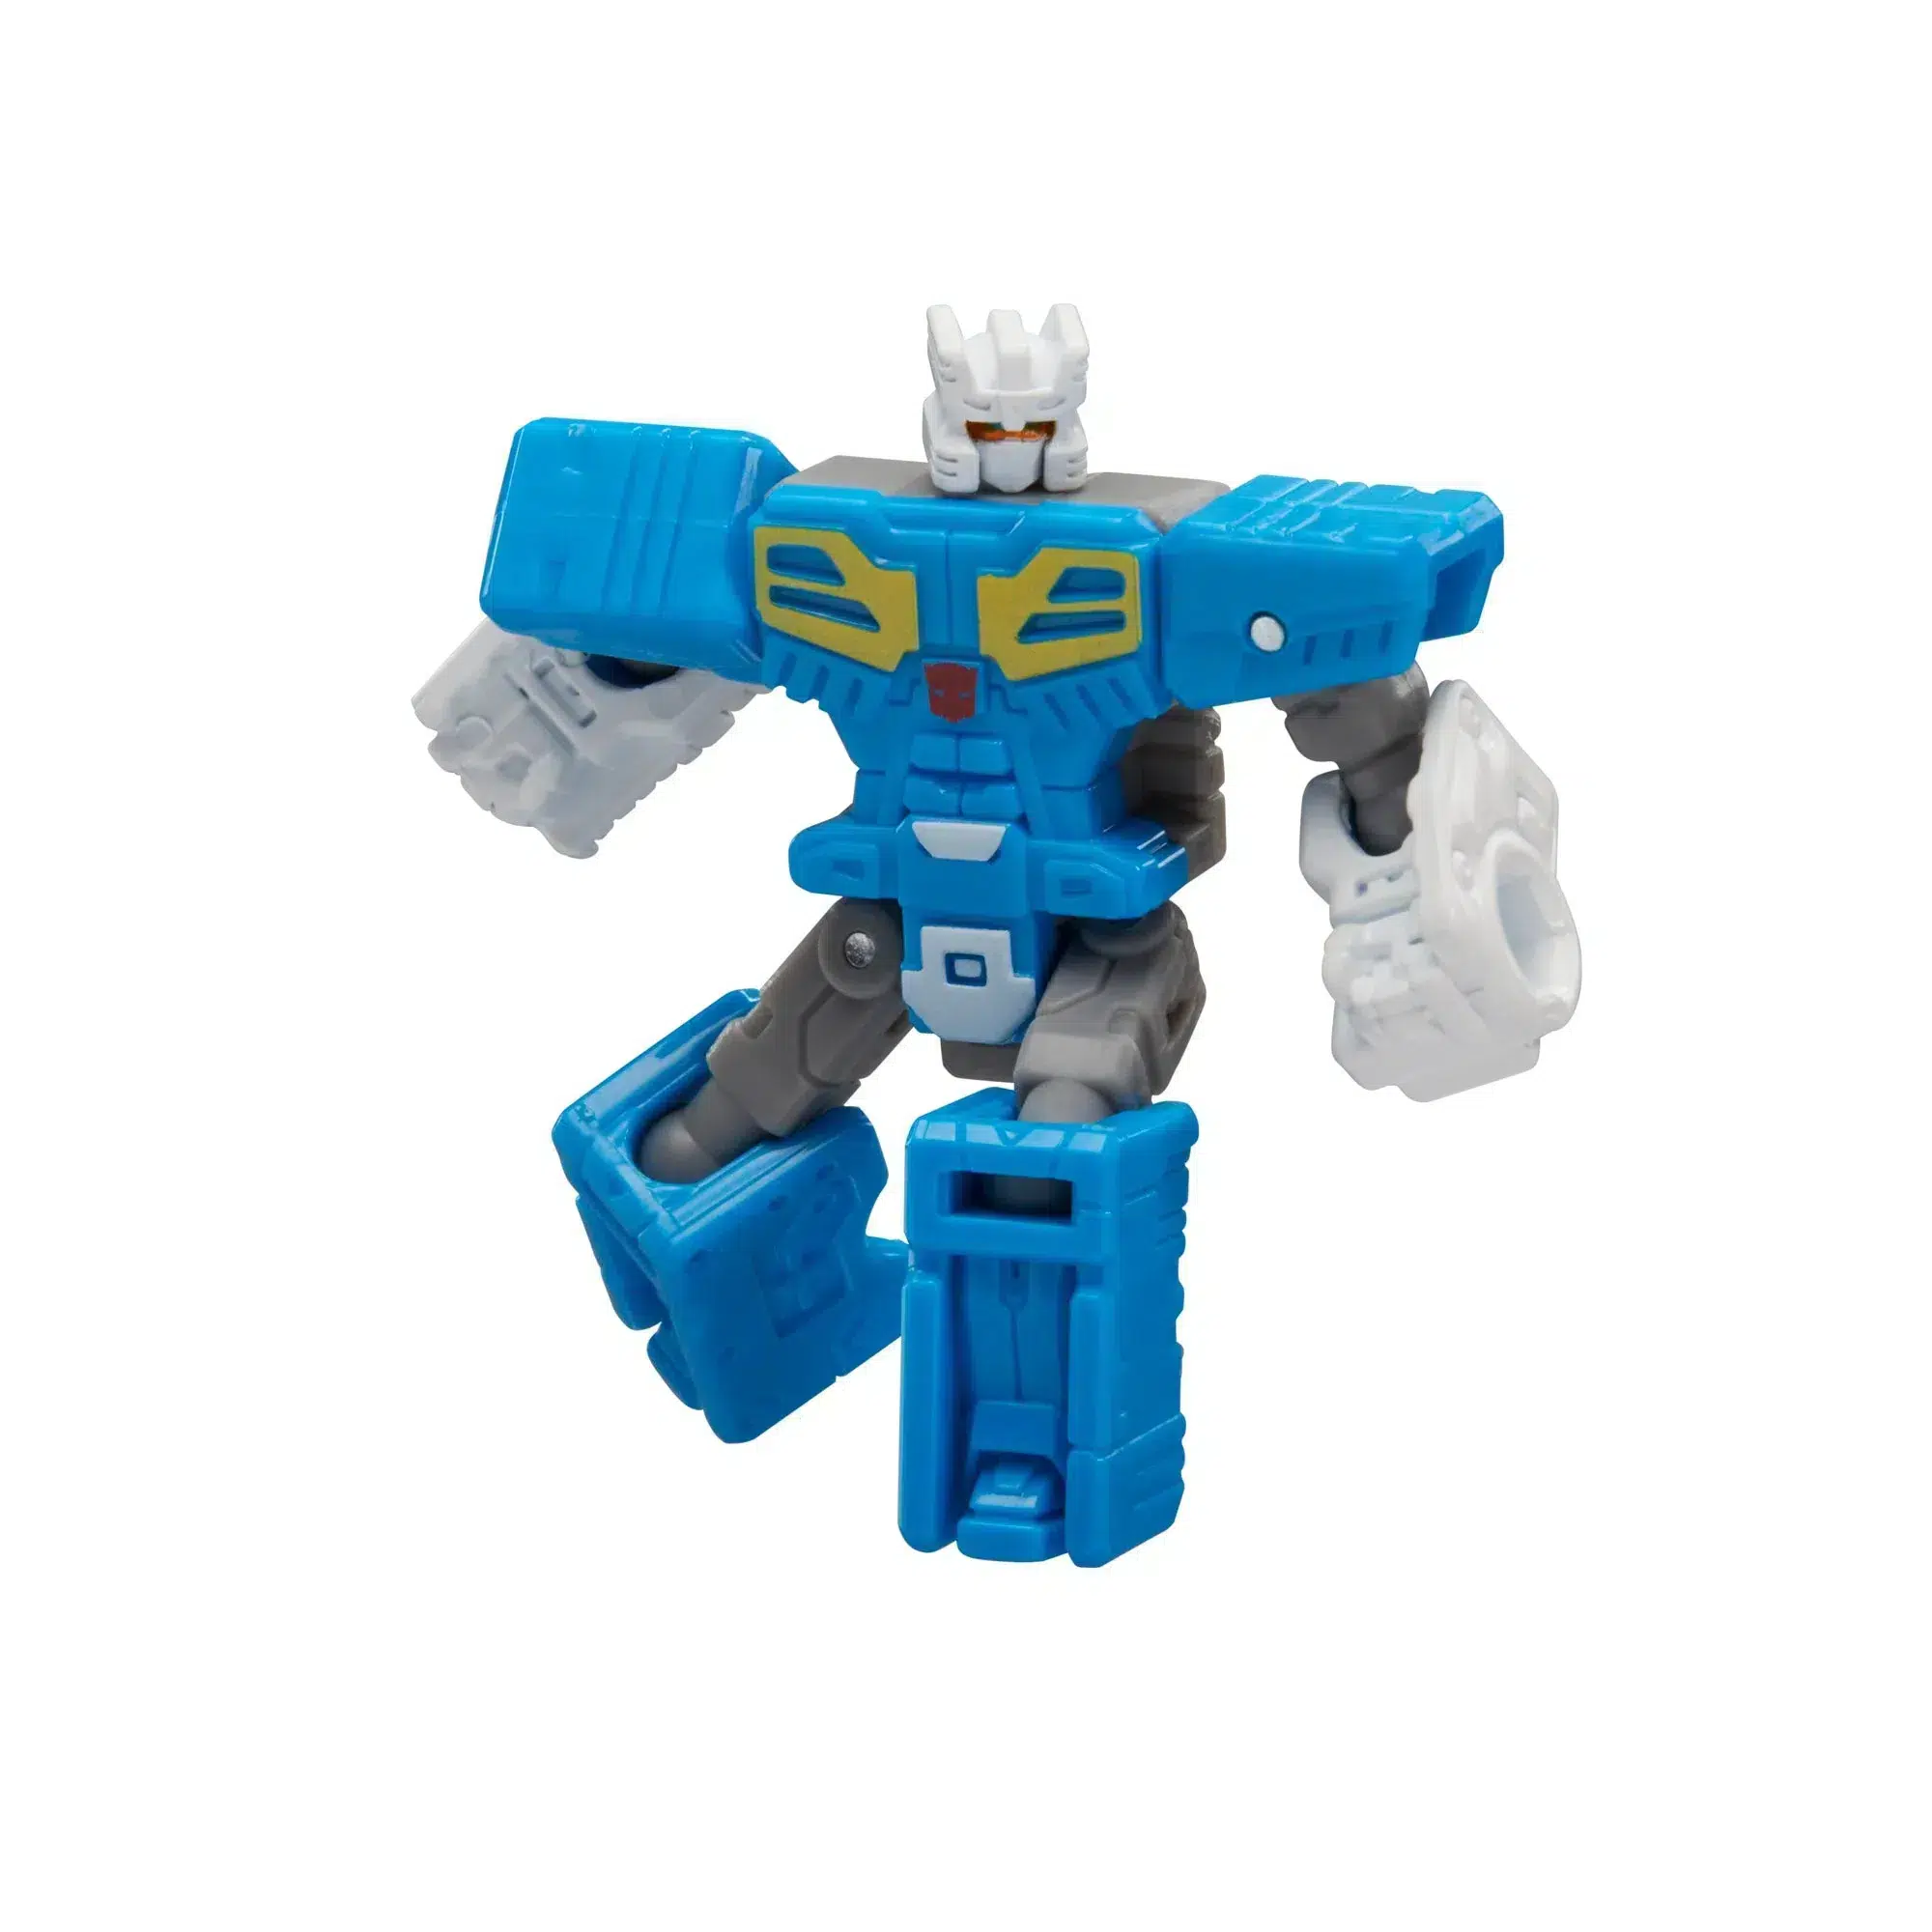 The Transformers The Movie Studio Series 86 25 Autobot Blaster Eject 5